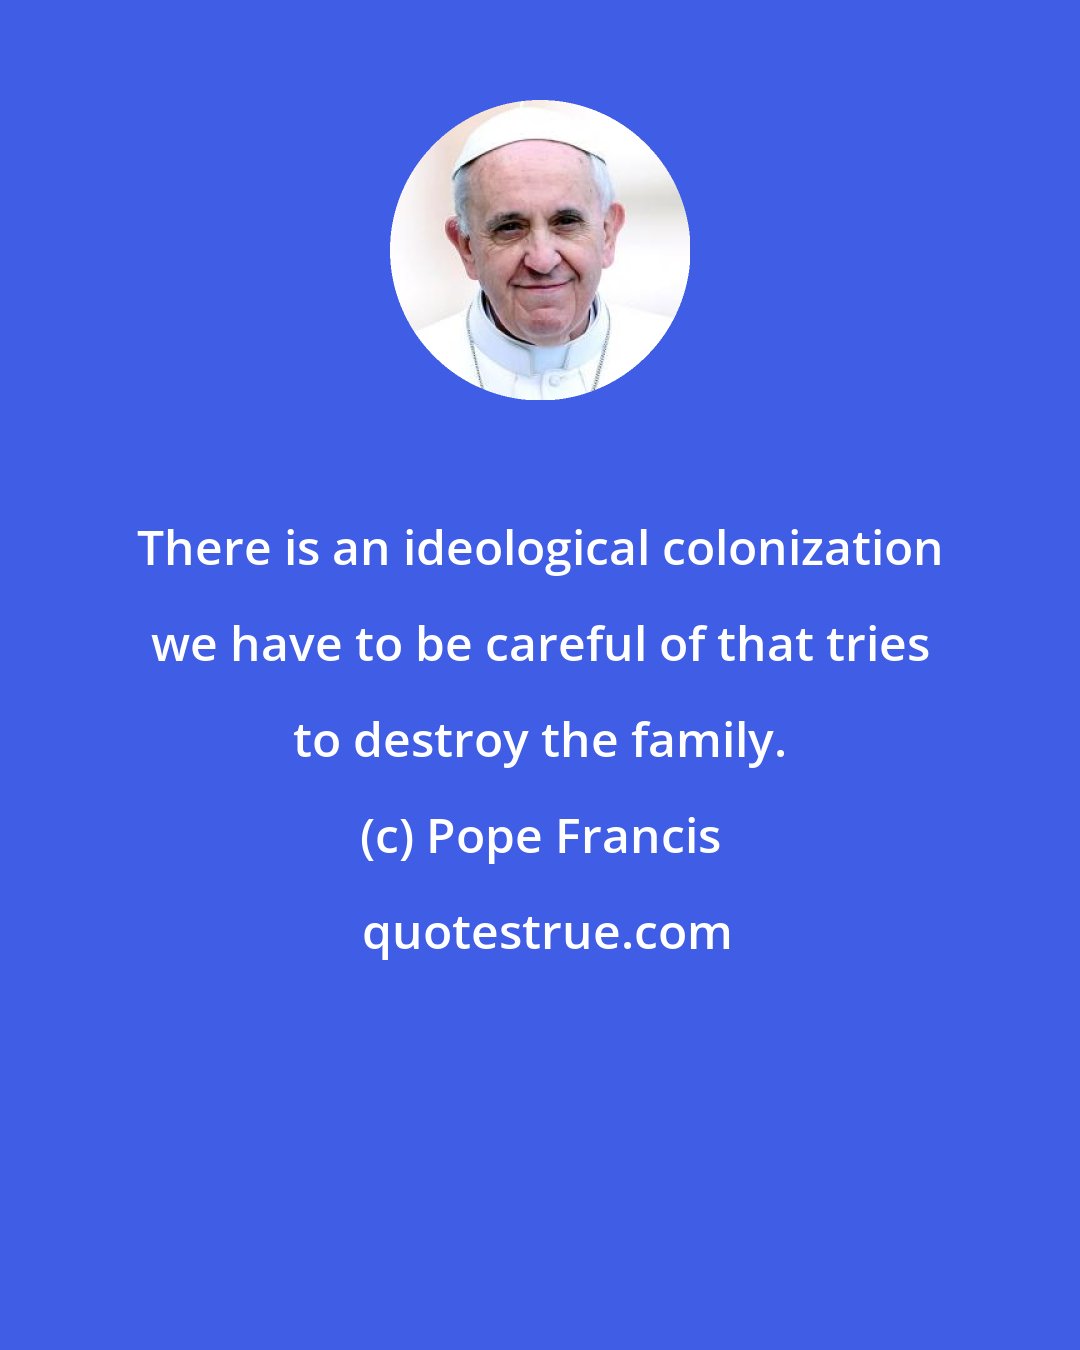 Pope Francis: There is an ideological colonization we have to be careful of that tries to destroy the family.